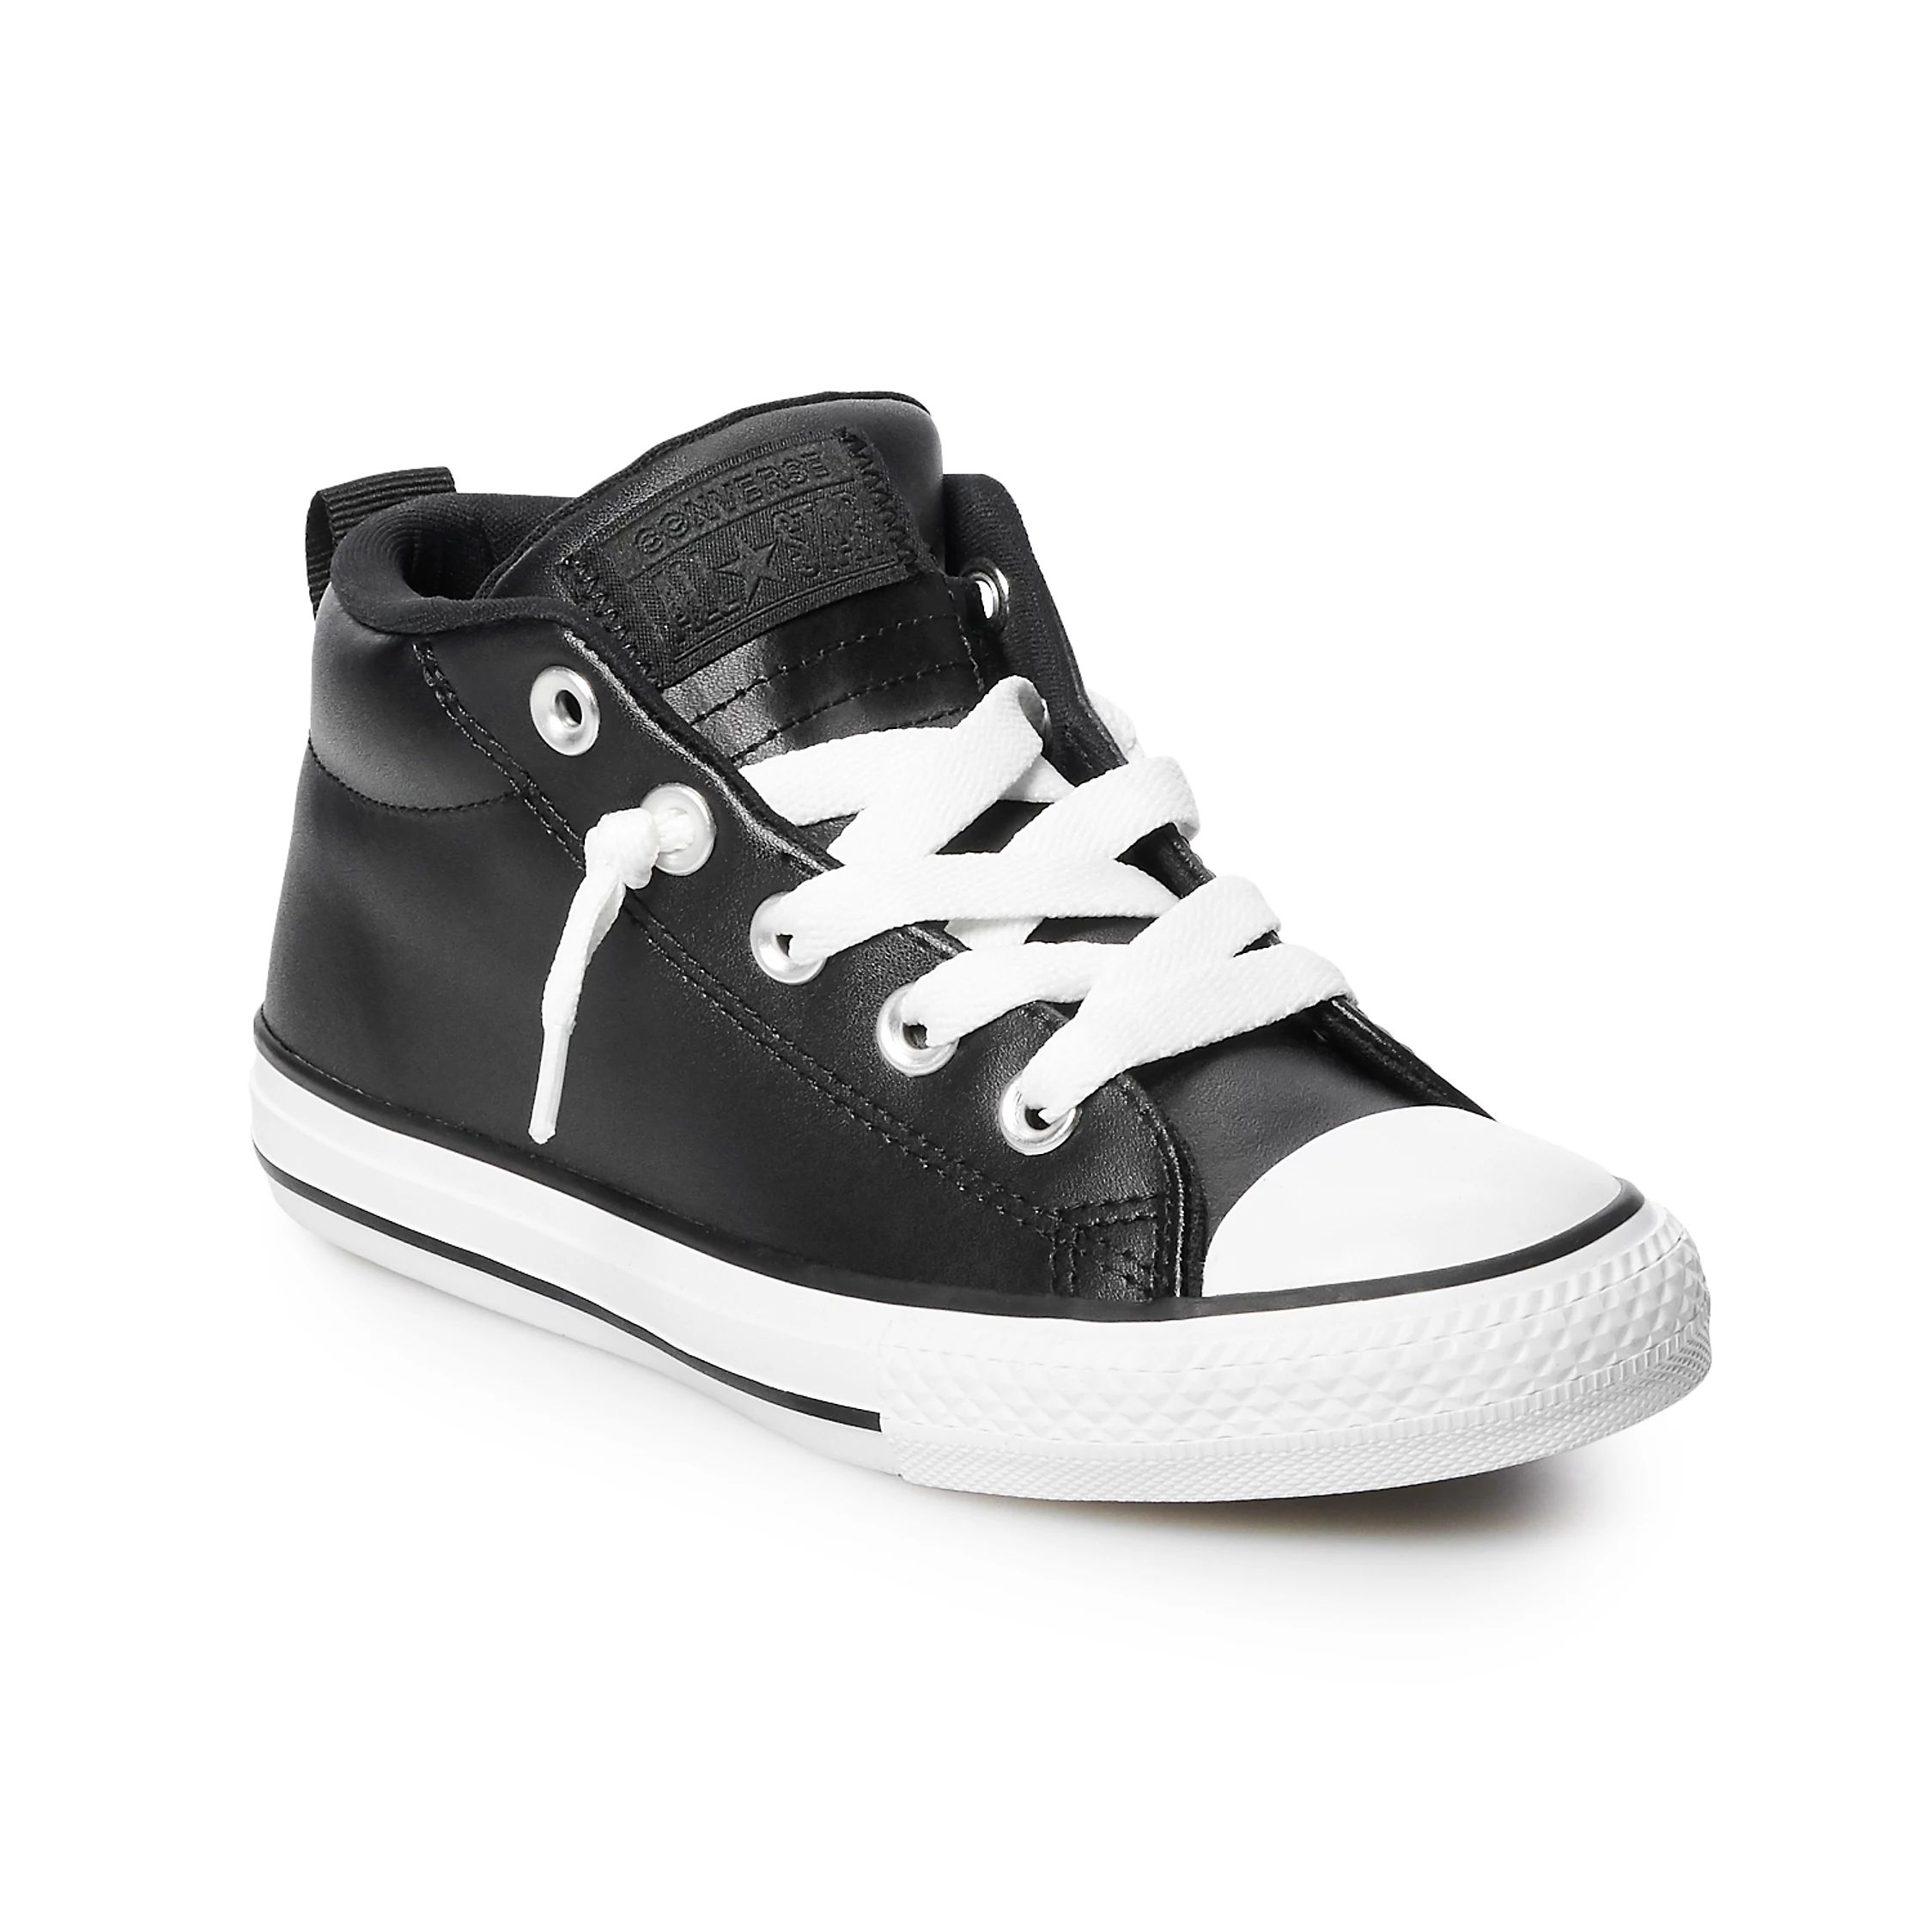 Boys' Converse Chuck Taylor All Star Street Mid Leather Sneakers | Kohl's